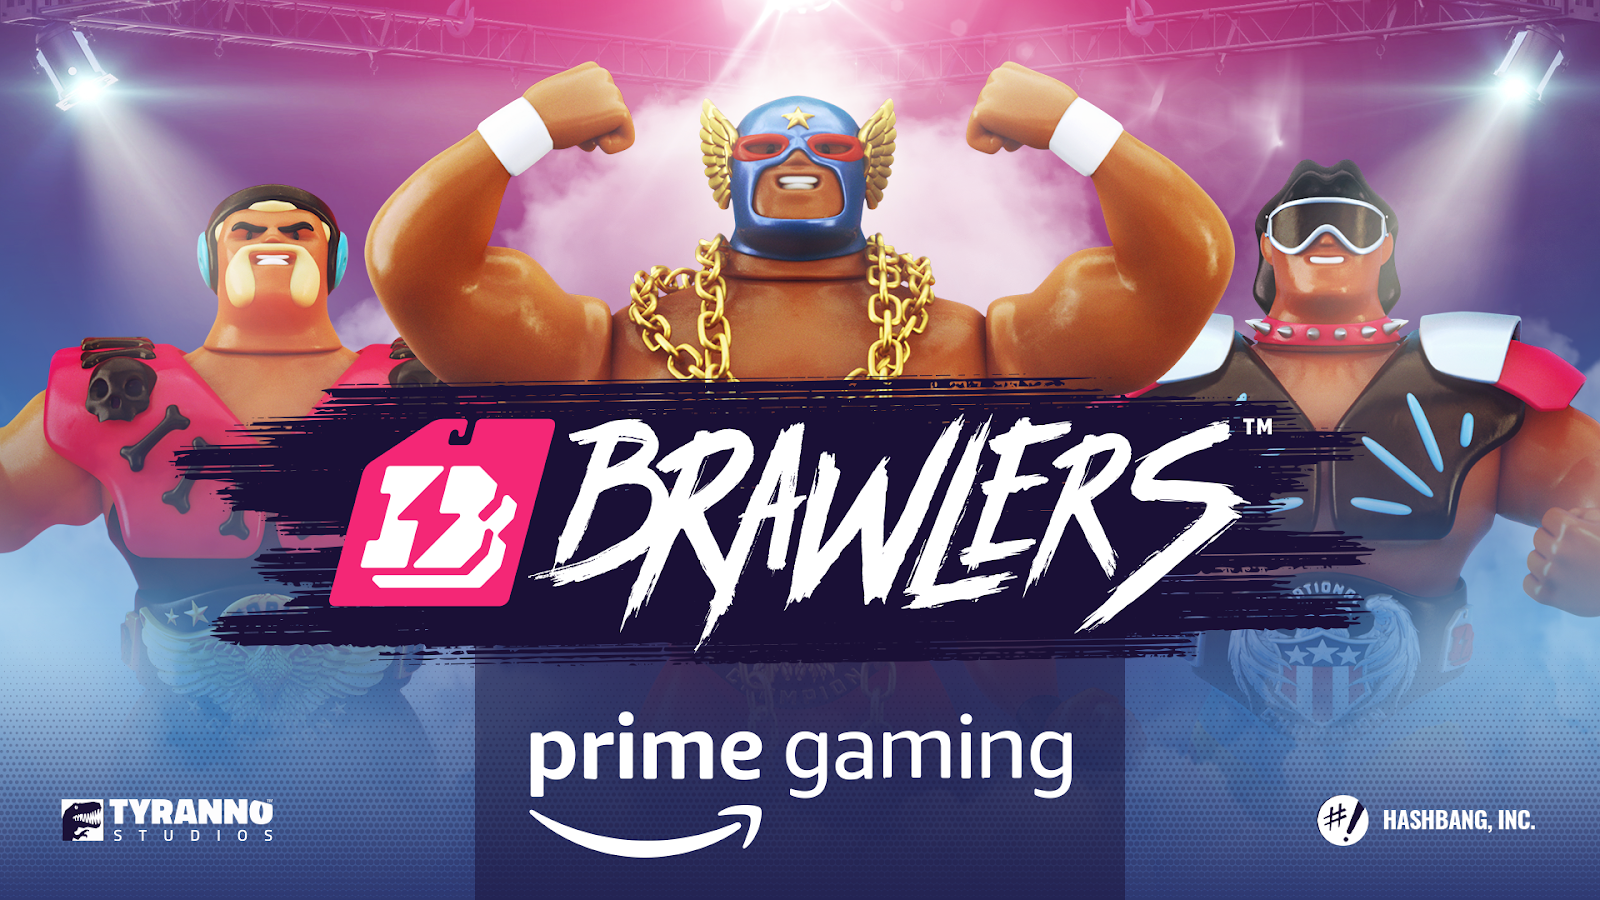 Prime, Mojo Melee to Offer Users a New Type of Game